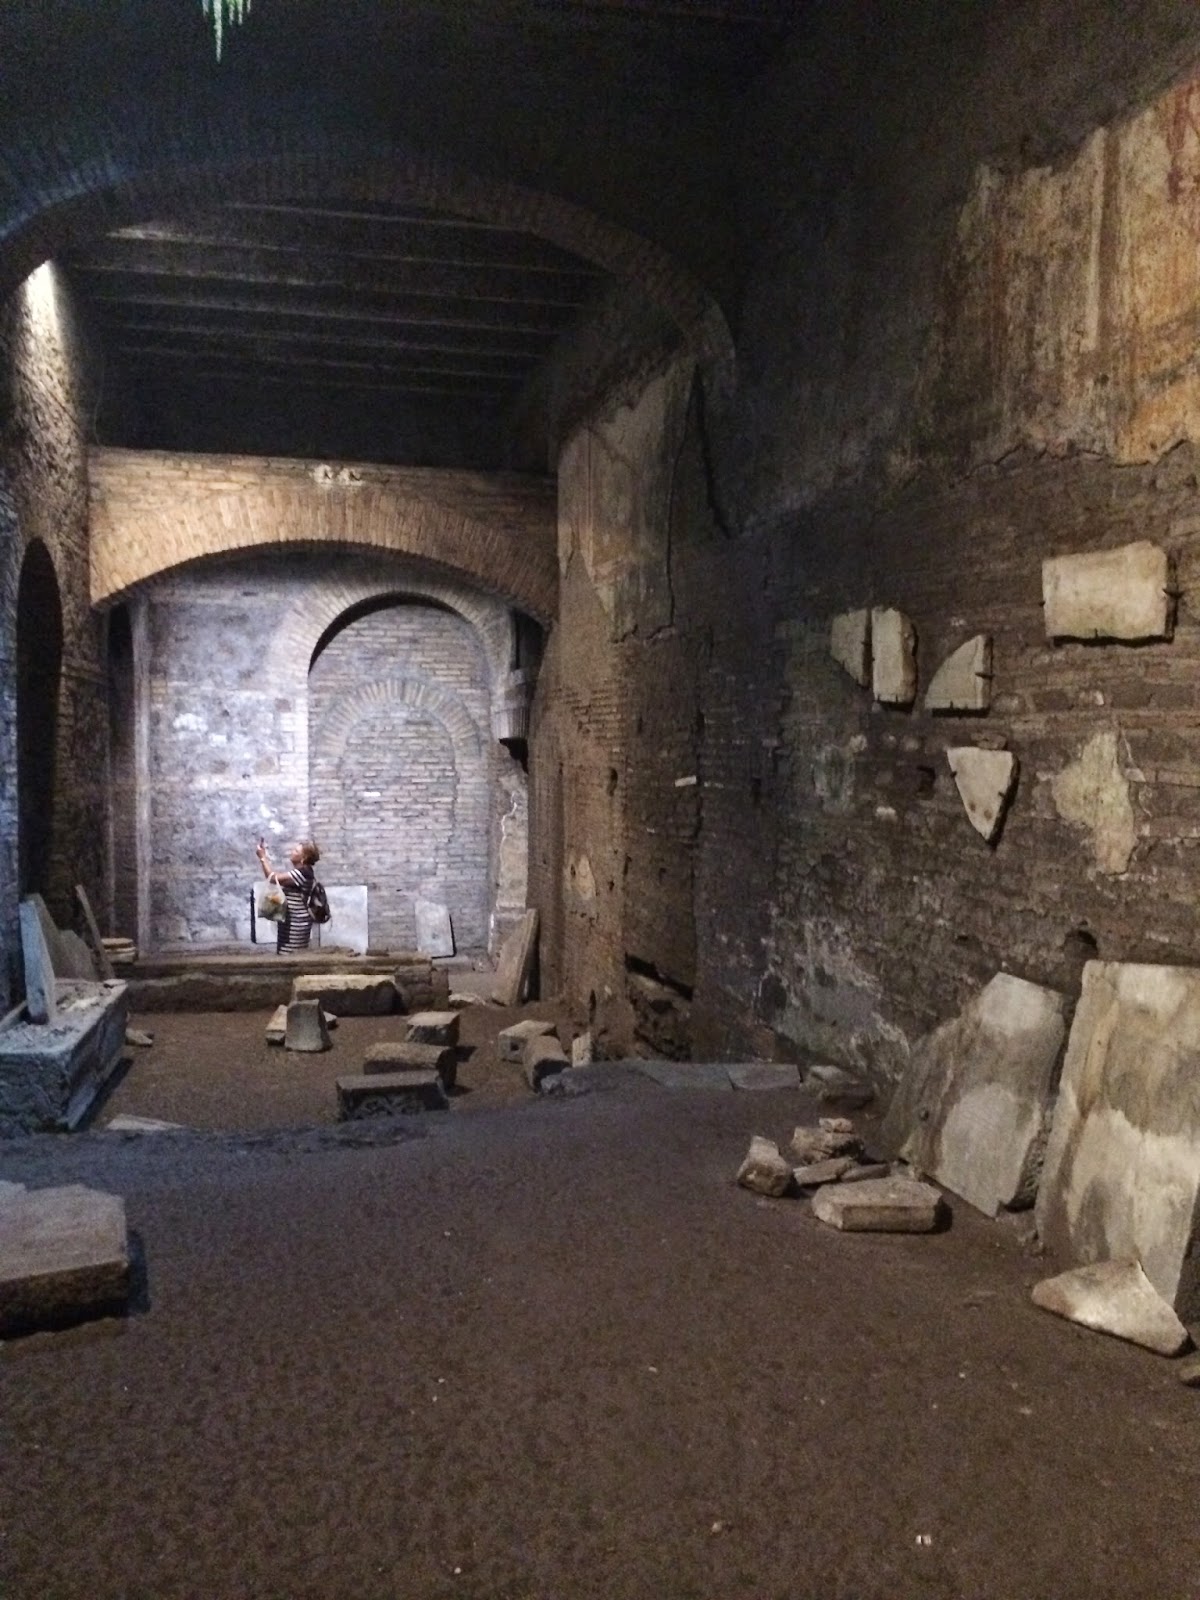 5-Things-I-Adore-About-Rome-Subterranean-Rome